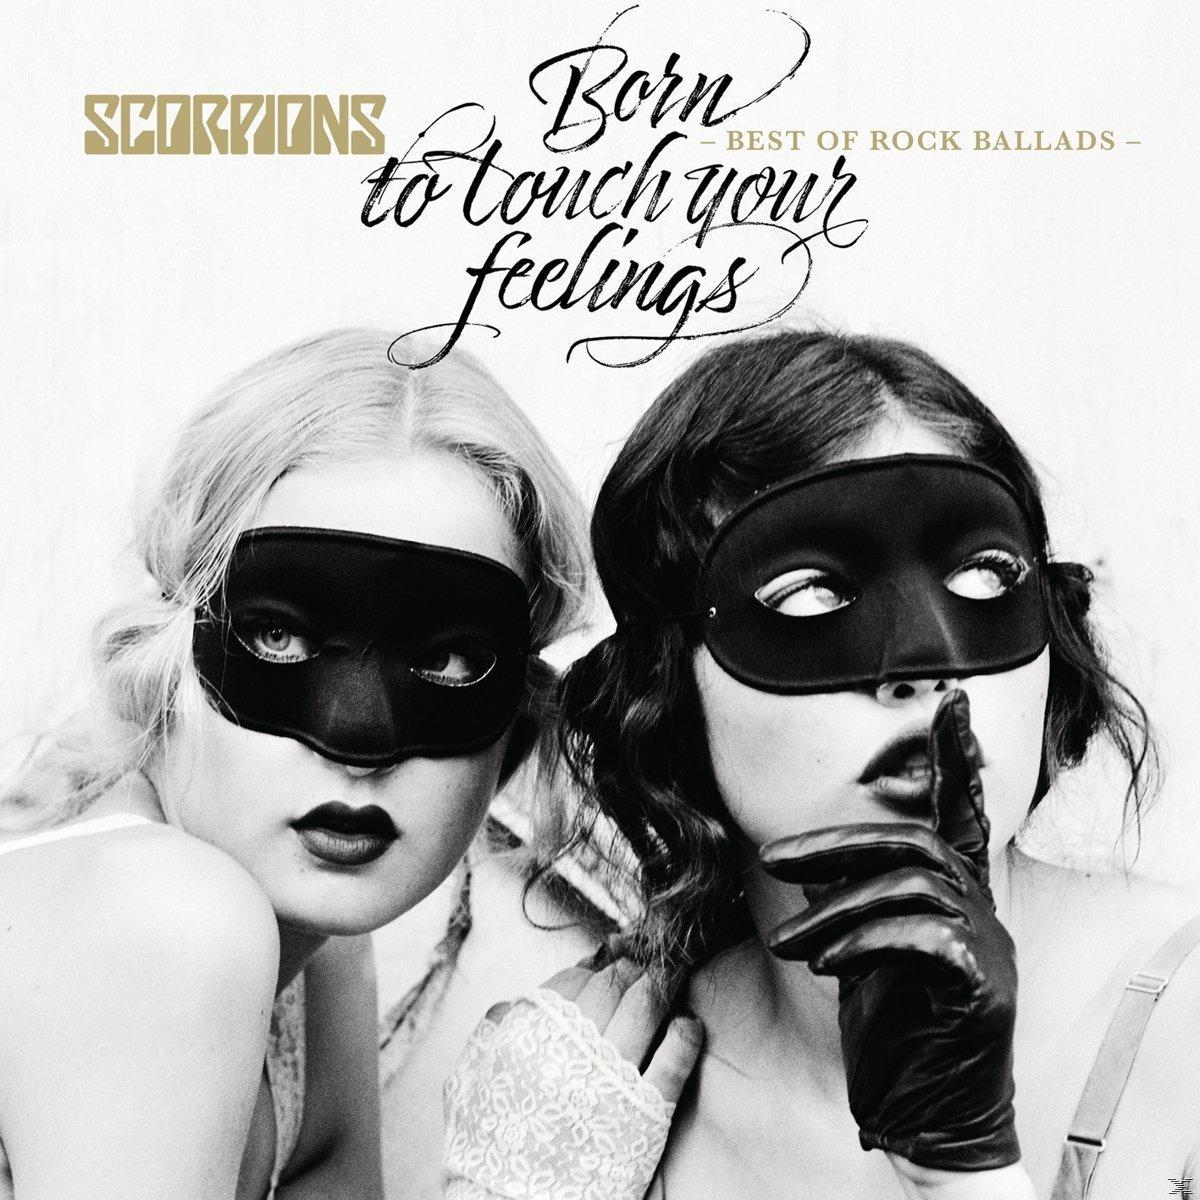 Rock Ballads Your of Feelings-Best Touch - Scorpions - (CD) To Born